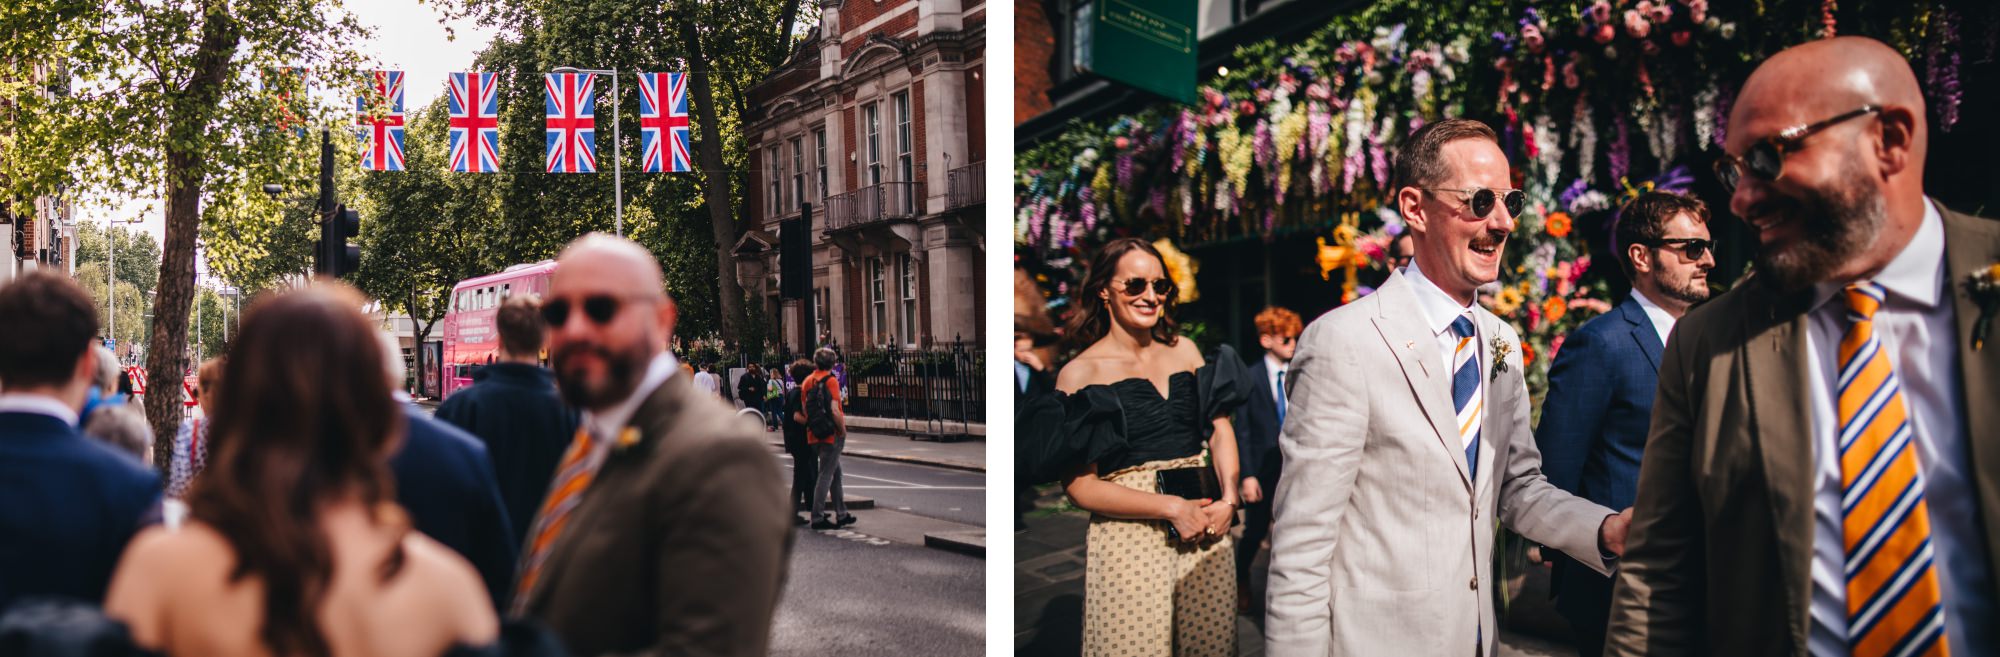 british flags, London bus, London wedding, grooms walking with guests